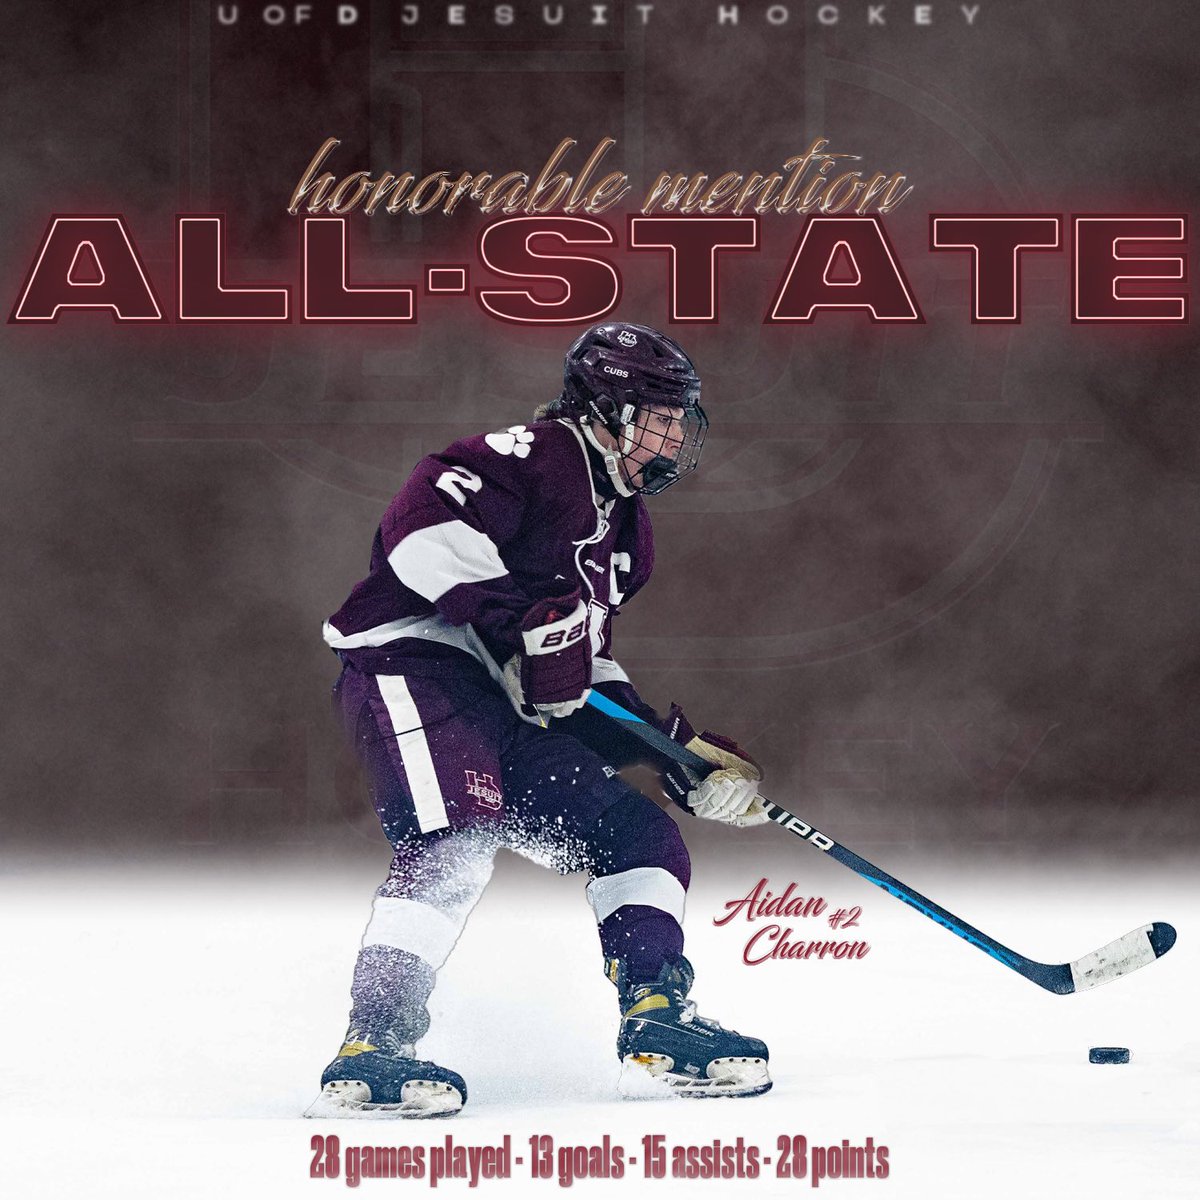 Congratulations to @UDJHockey Senior Forward Aidan Charron on being selected Honorable Mention All State! #AMDG